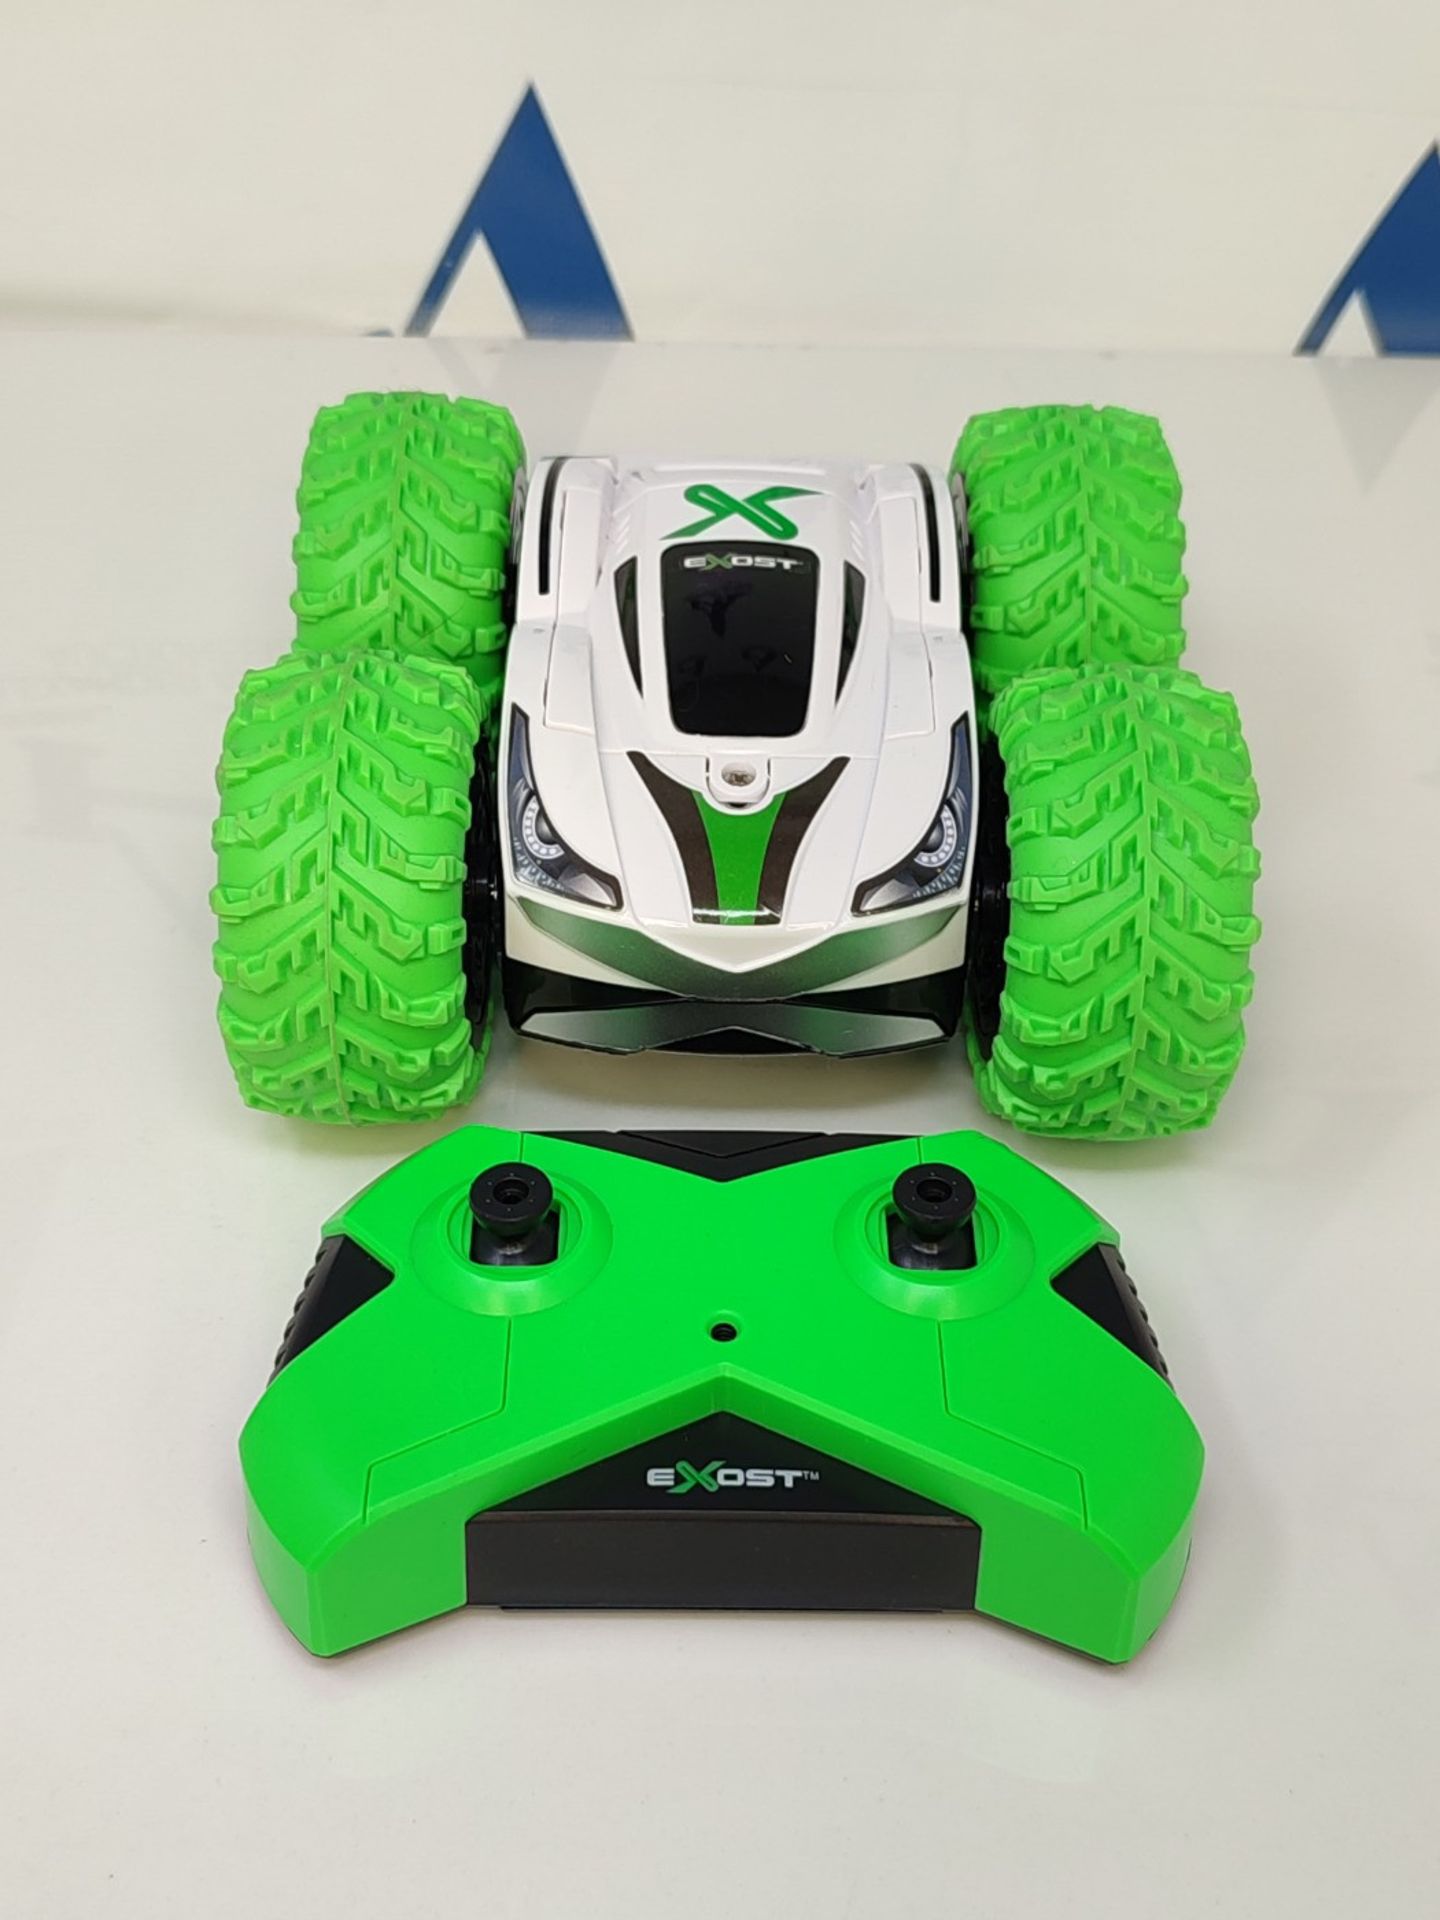 EXOST All-Terrain Remote Control Car - 360 Cross 2.4Ghz - 2-sided driving and 360° - - Image 3 of 3